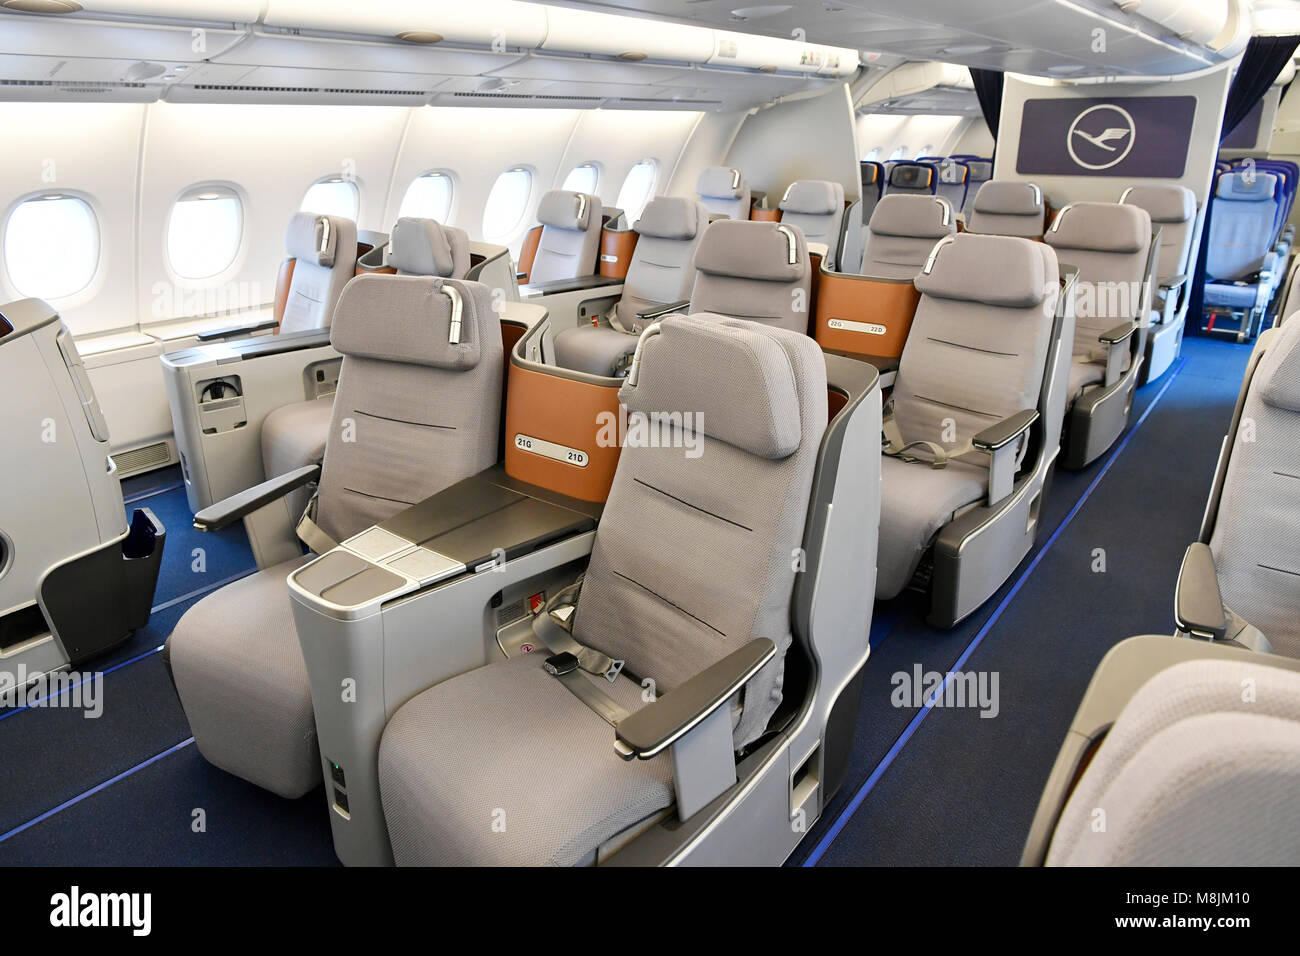 Displays, Seats, , Lufthansa, Airbus A380-800, Emergency exit, Sleep, seat, modern, Business Class, Upper Deck, Space, Passenger, Pax, Aisle, Table, Stock Photo